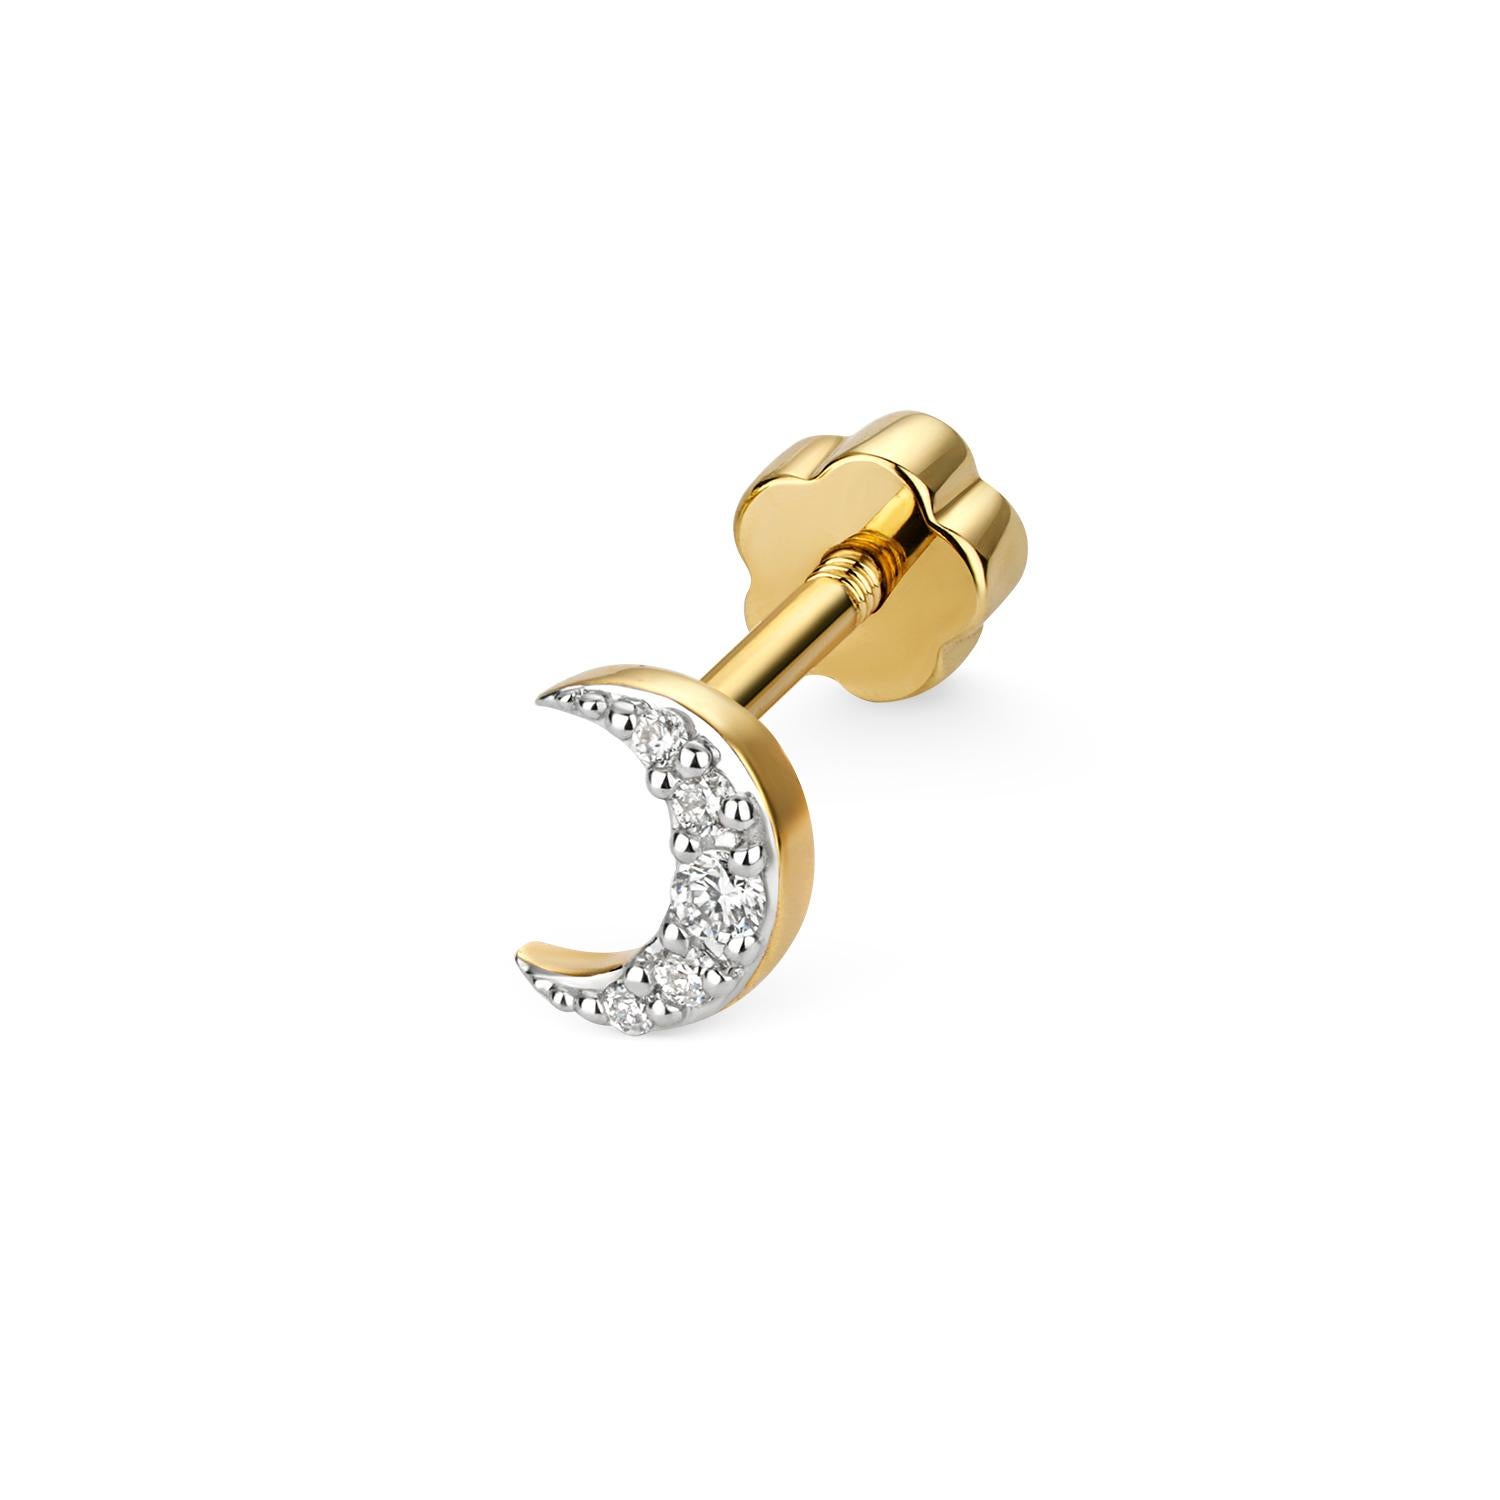 DIAMOND CARTILAGE MOON STUD

9CT Y/G GH SI3-I1 0.03CT

Weight: 0.5g

Number Of Stones:5

Total Carates:0.030